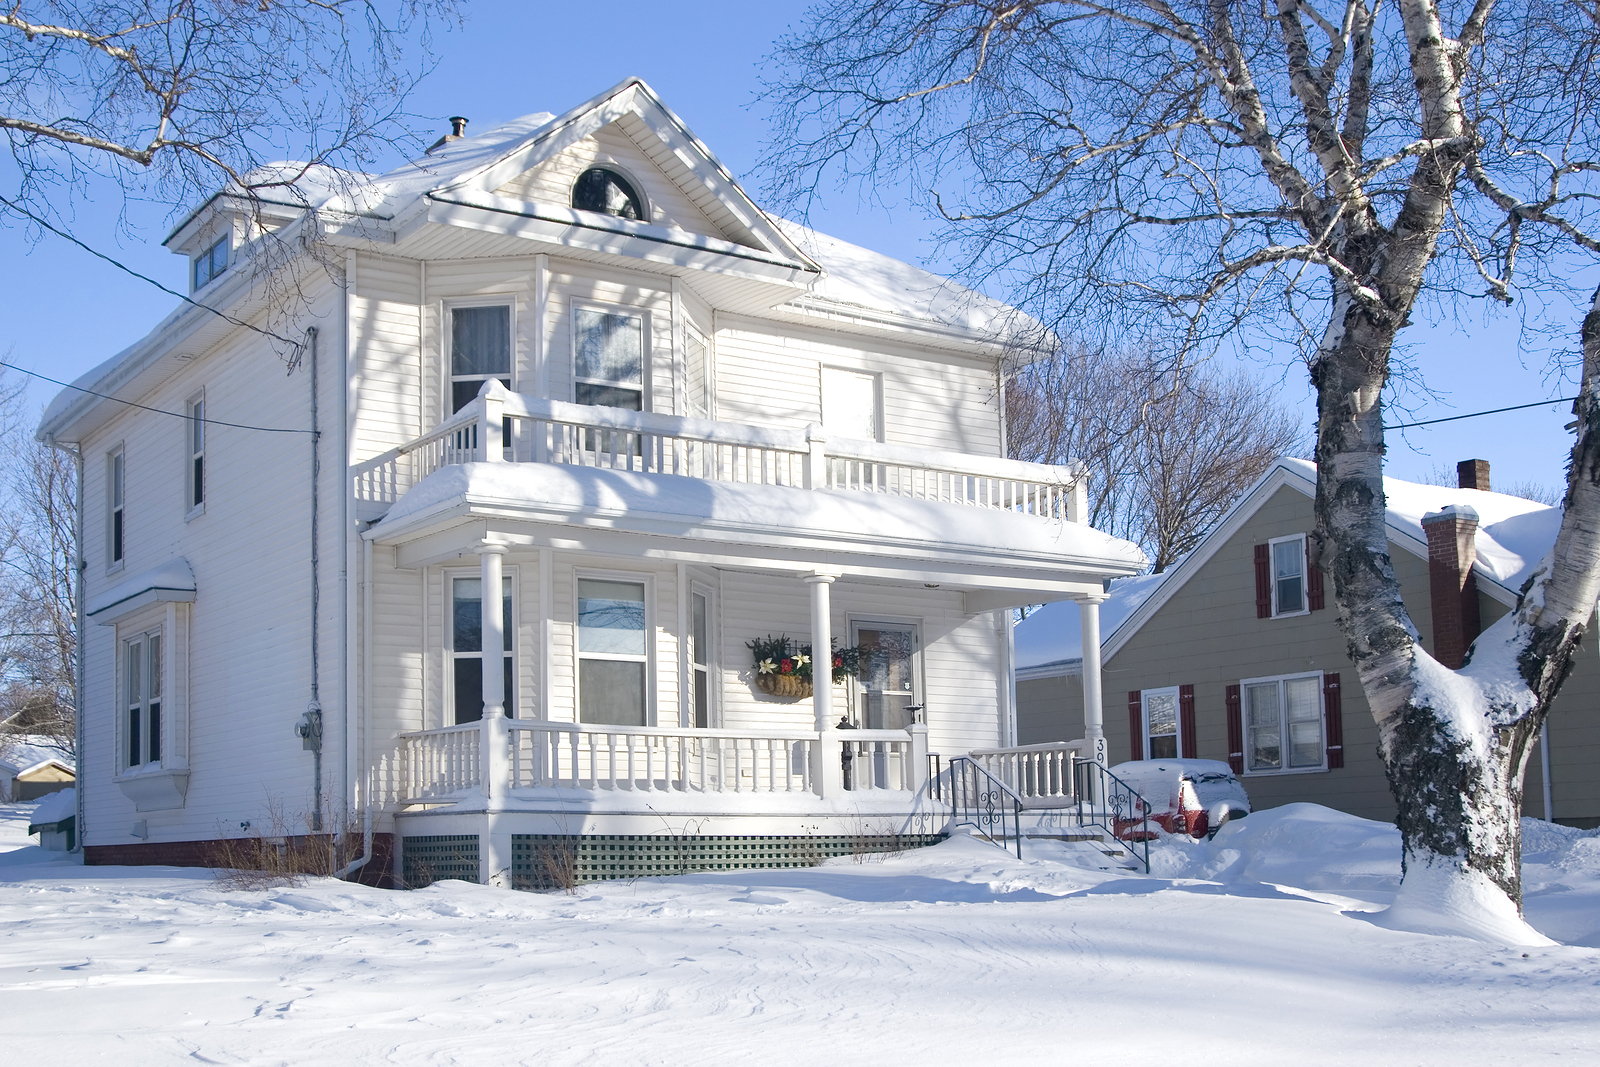 Tips for closing up vacation home before winter